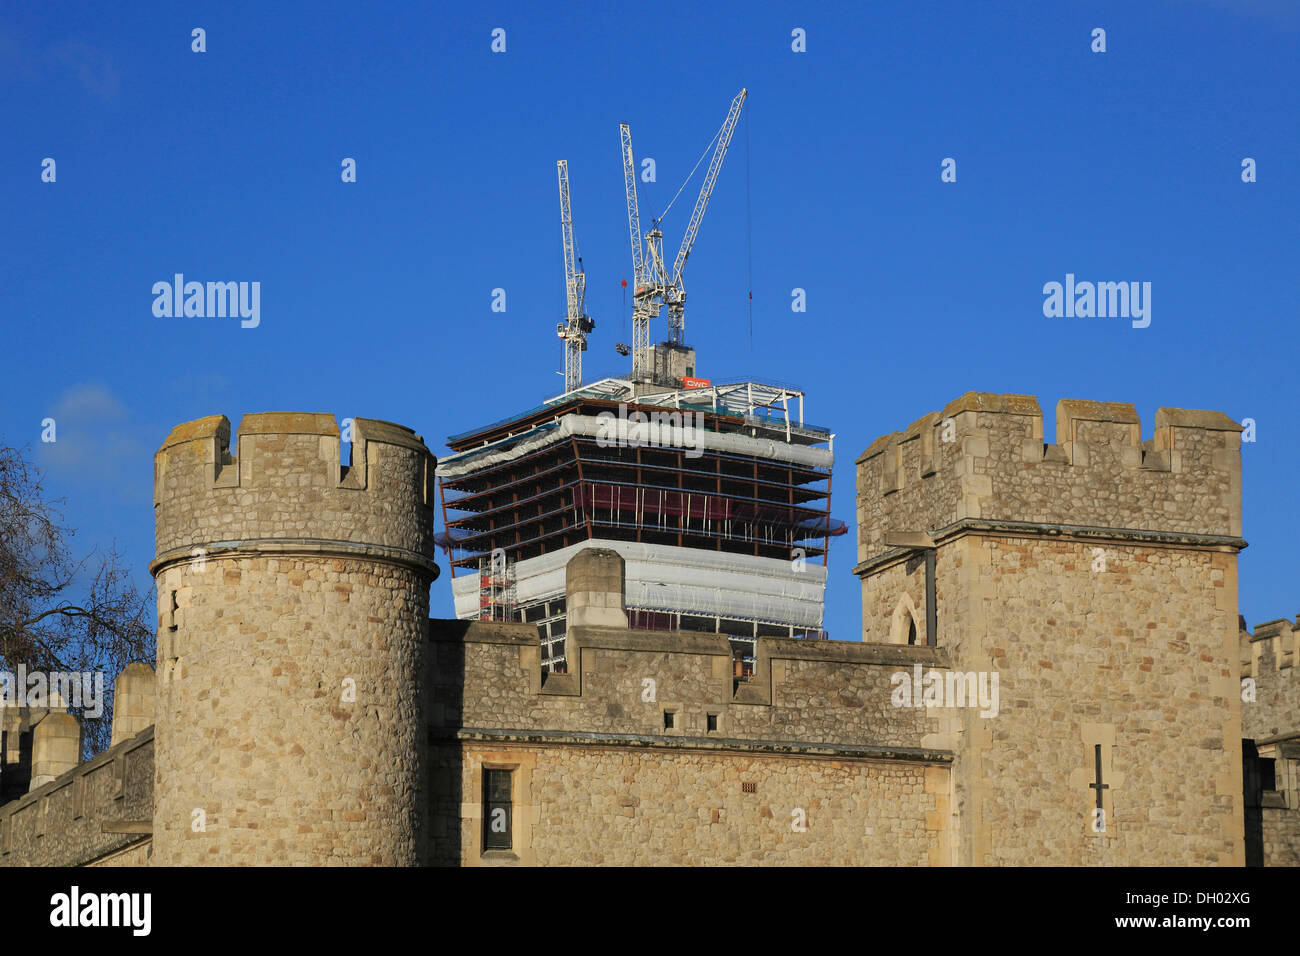 The Tower of London in front of the high-rise construction site of 20 Fenchurch Street, City of London, London, London region Stock Photo